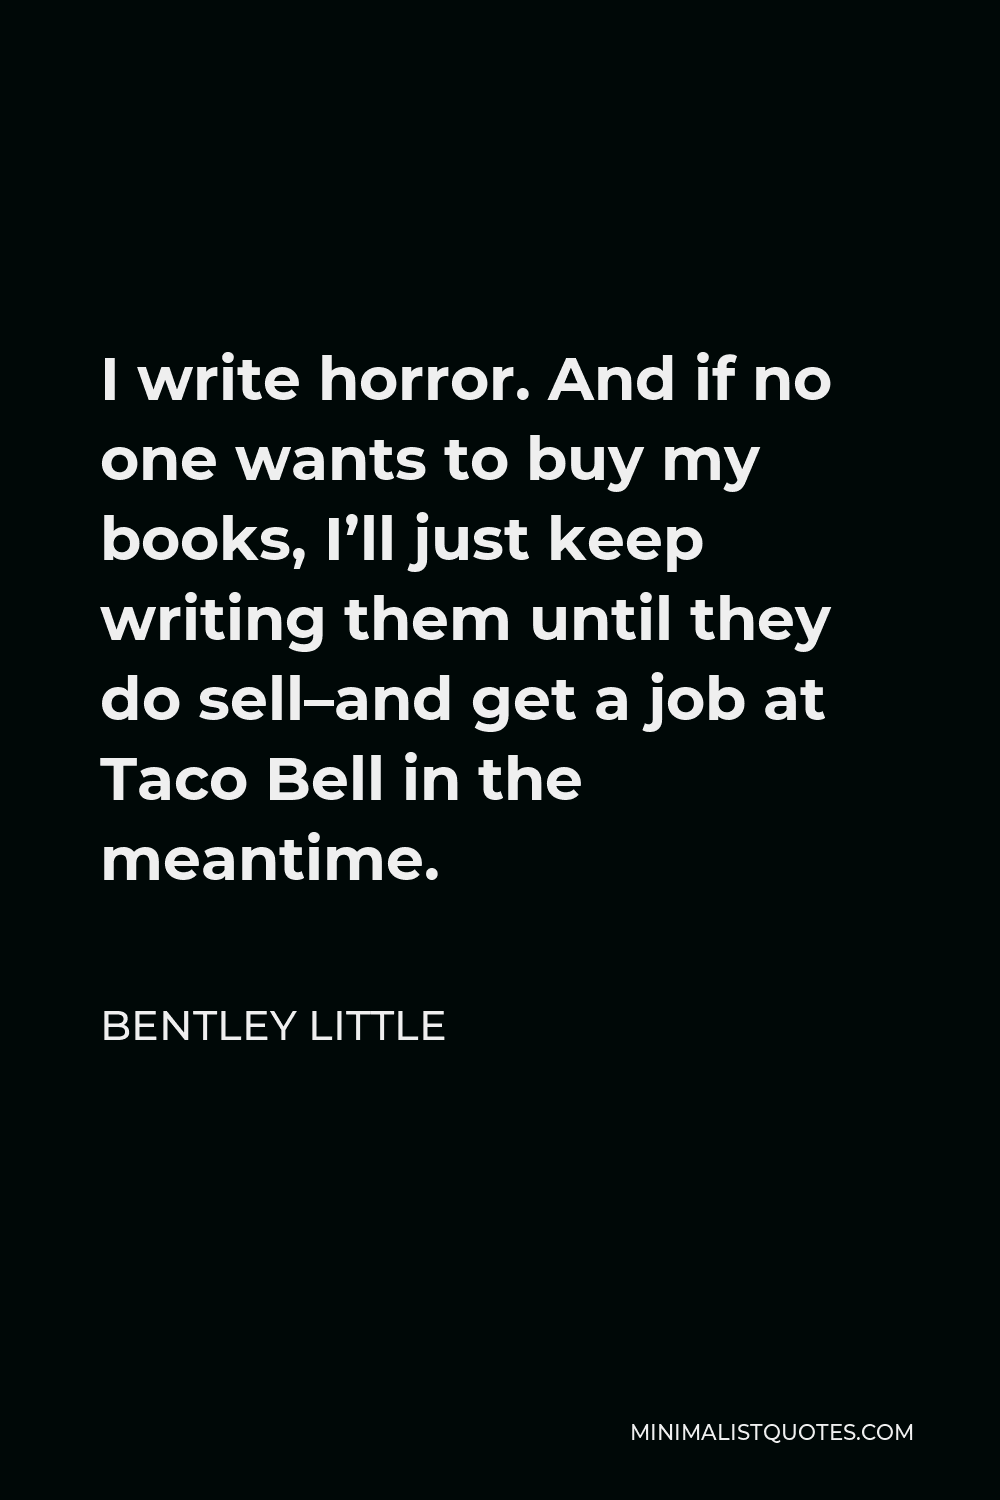 Bentley Little Quote - I write horror. And if no one wants to buy my books, I’ll just keep writing them until they do sell–and get a job at Taco Bell in the meantime.